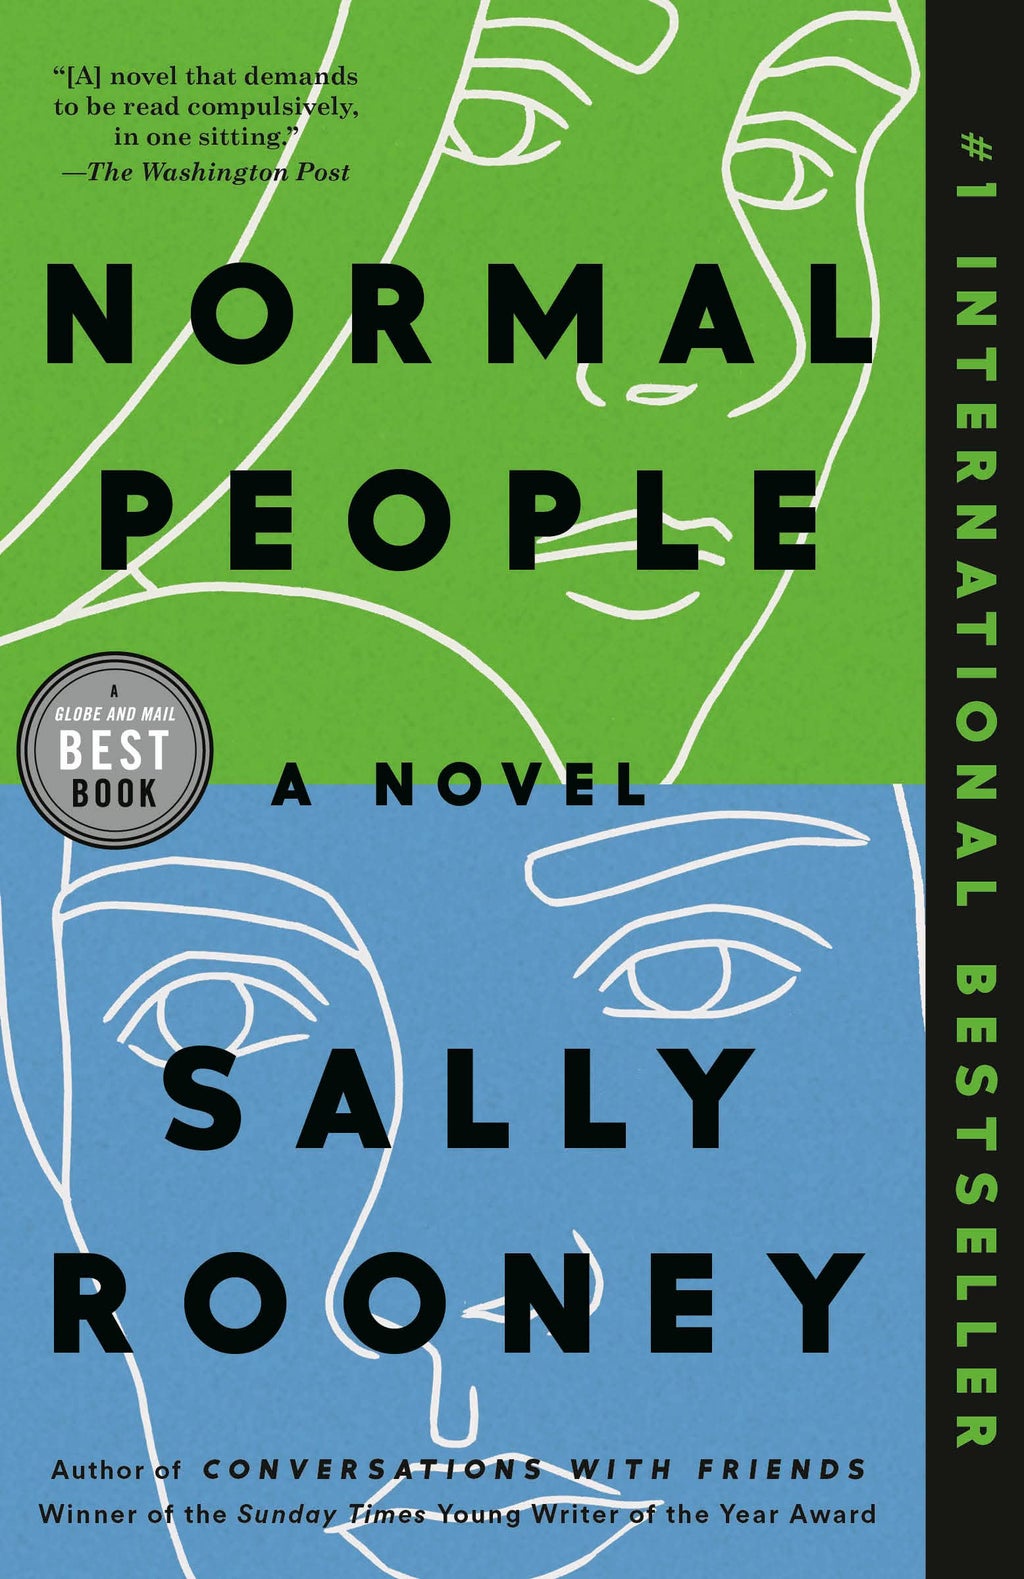 book cover of normal people